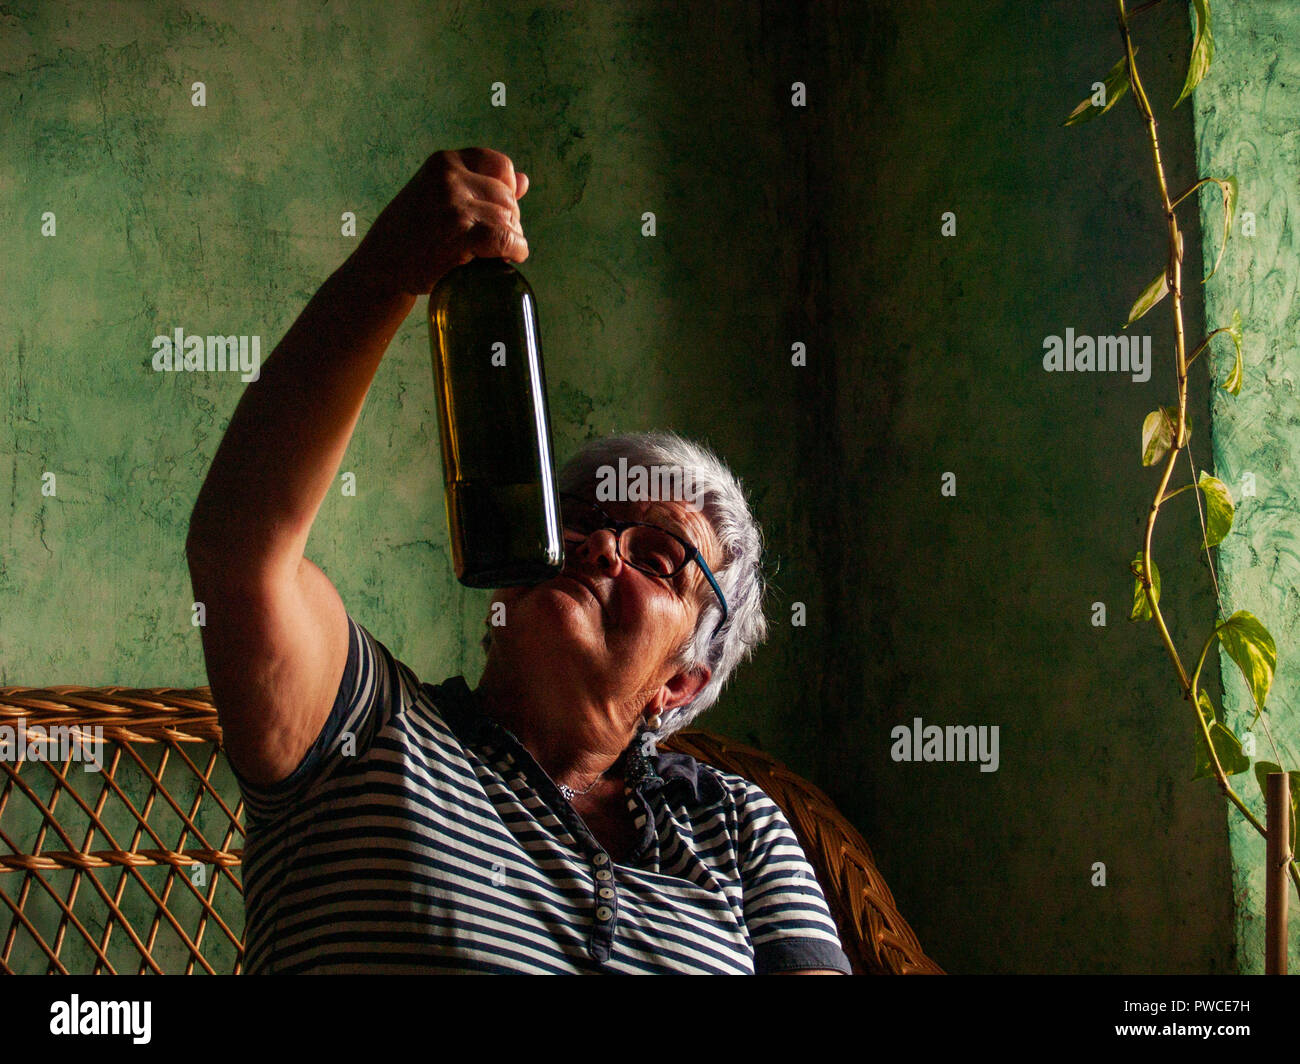 A drunk woman drinking from a bottle of wine in her hand Stock Photo